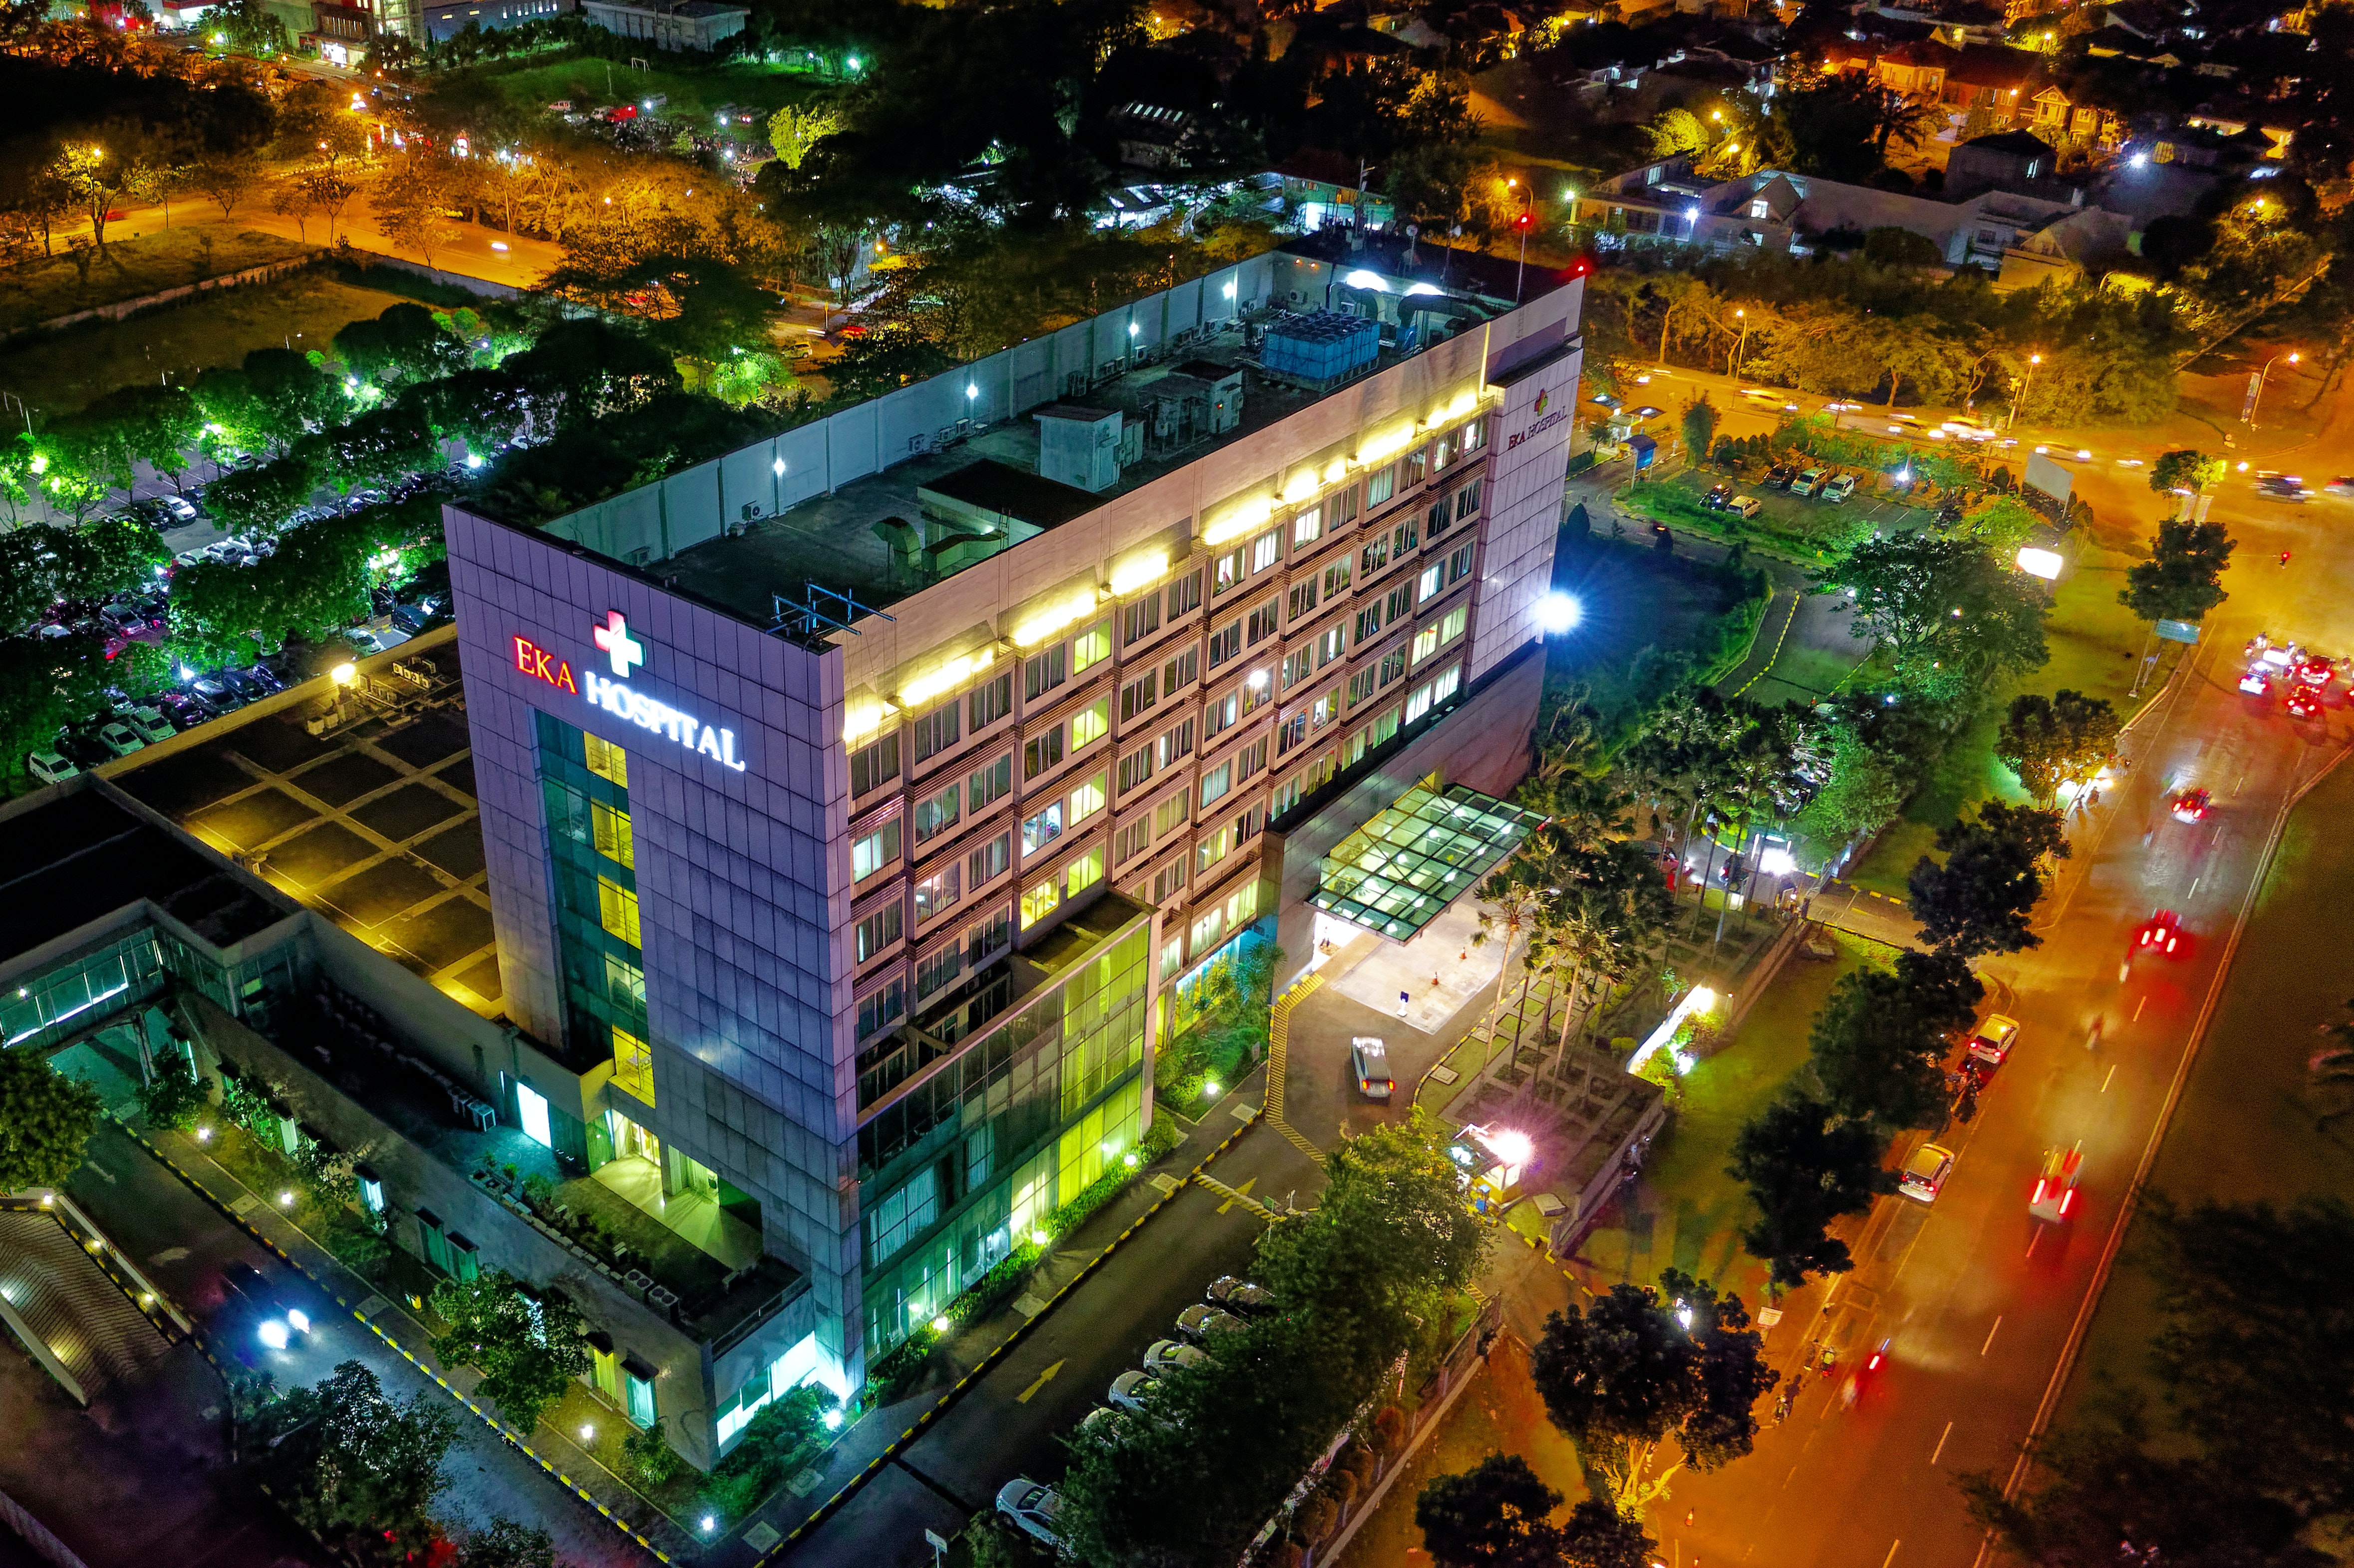 Aerial photo of hospital at night Photo by Tom Fisk from Pexels